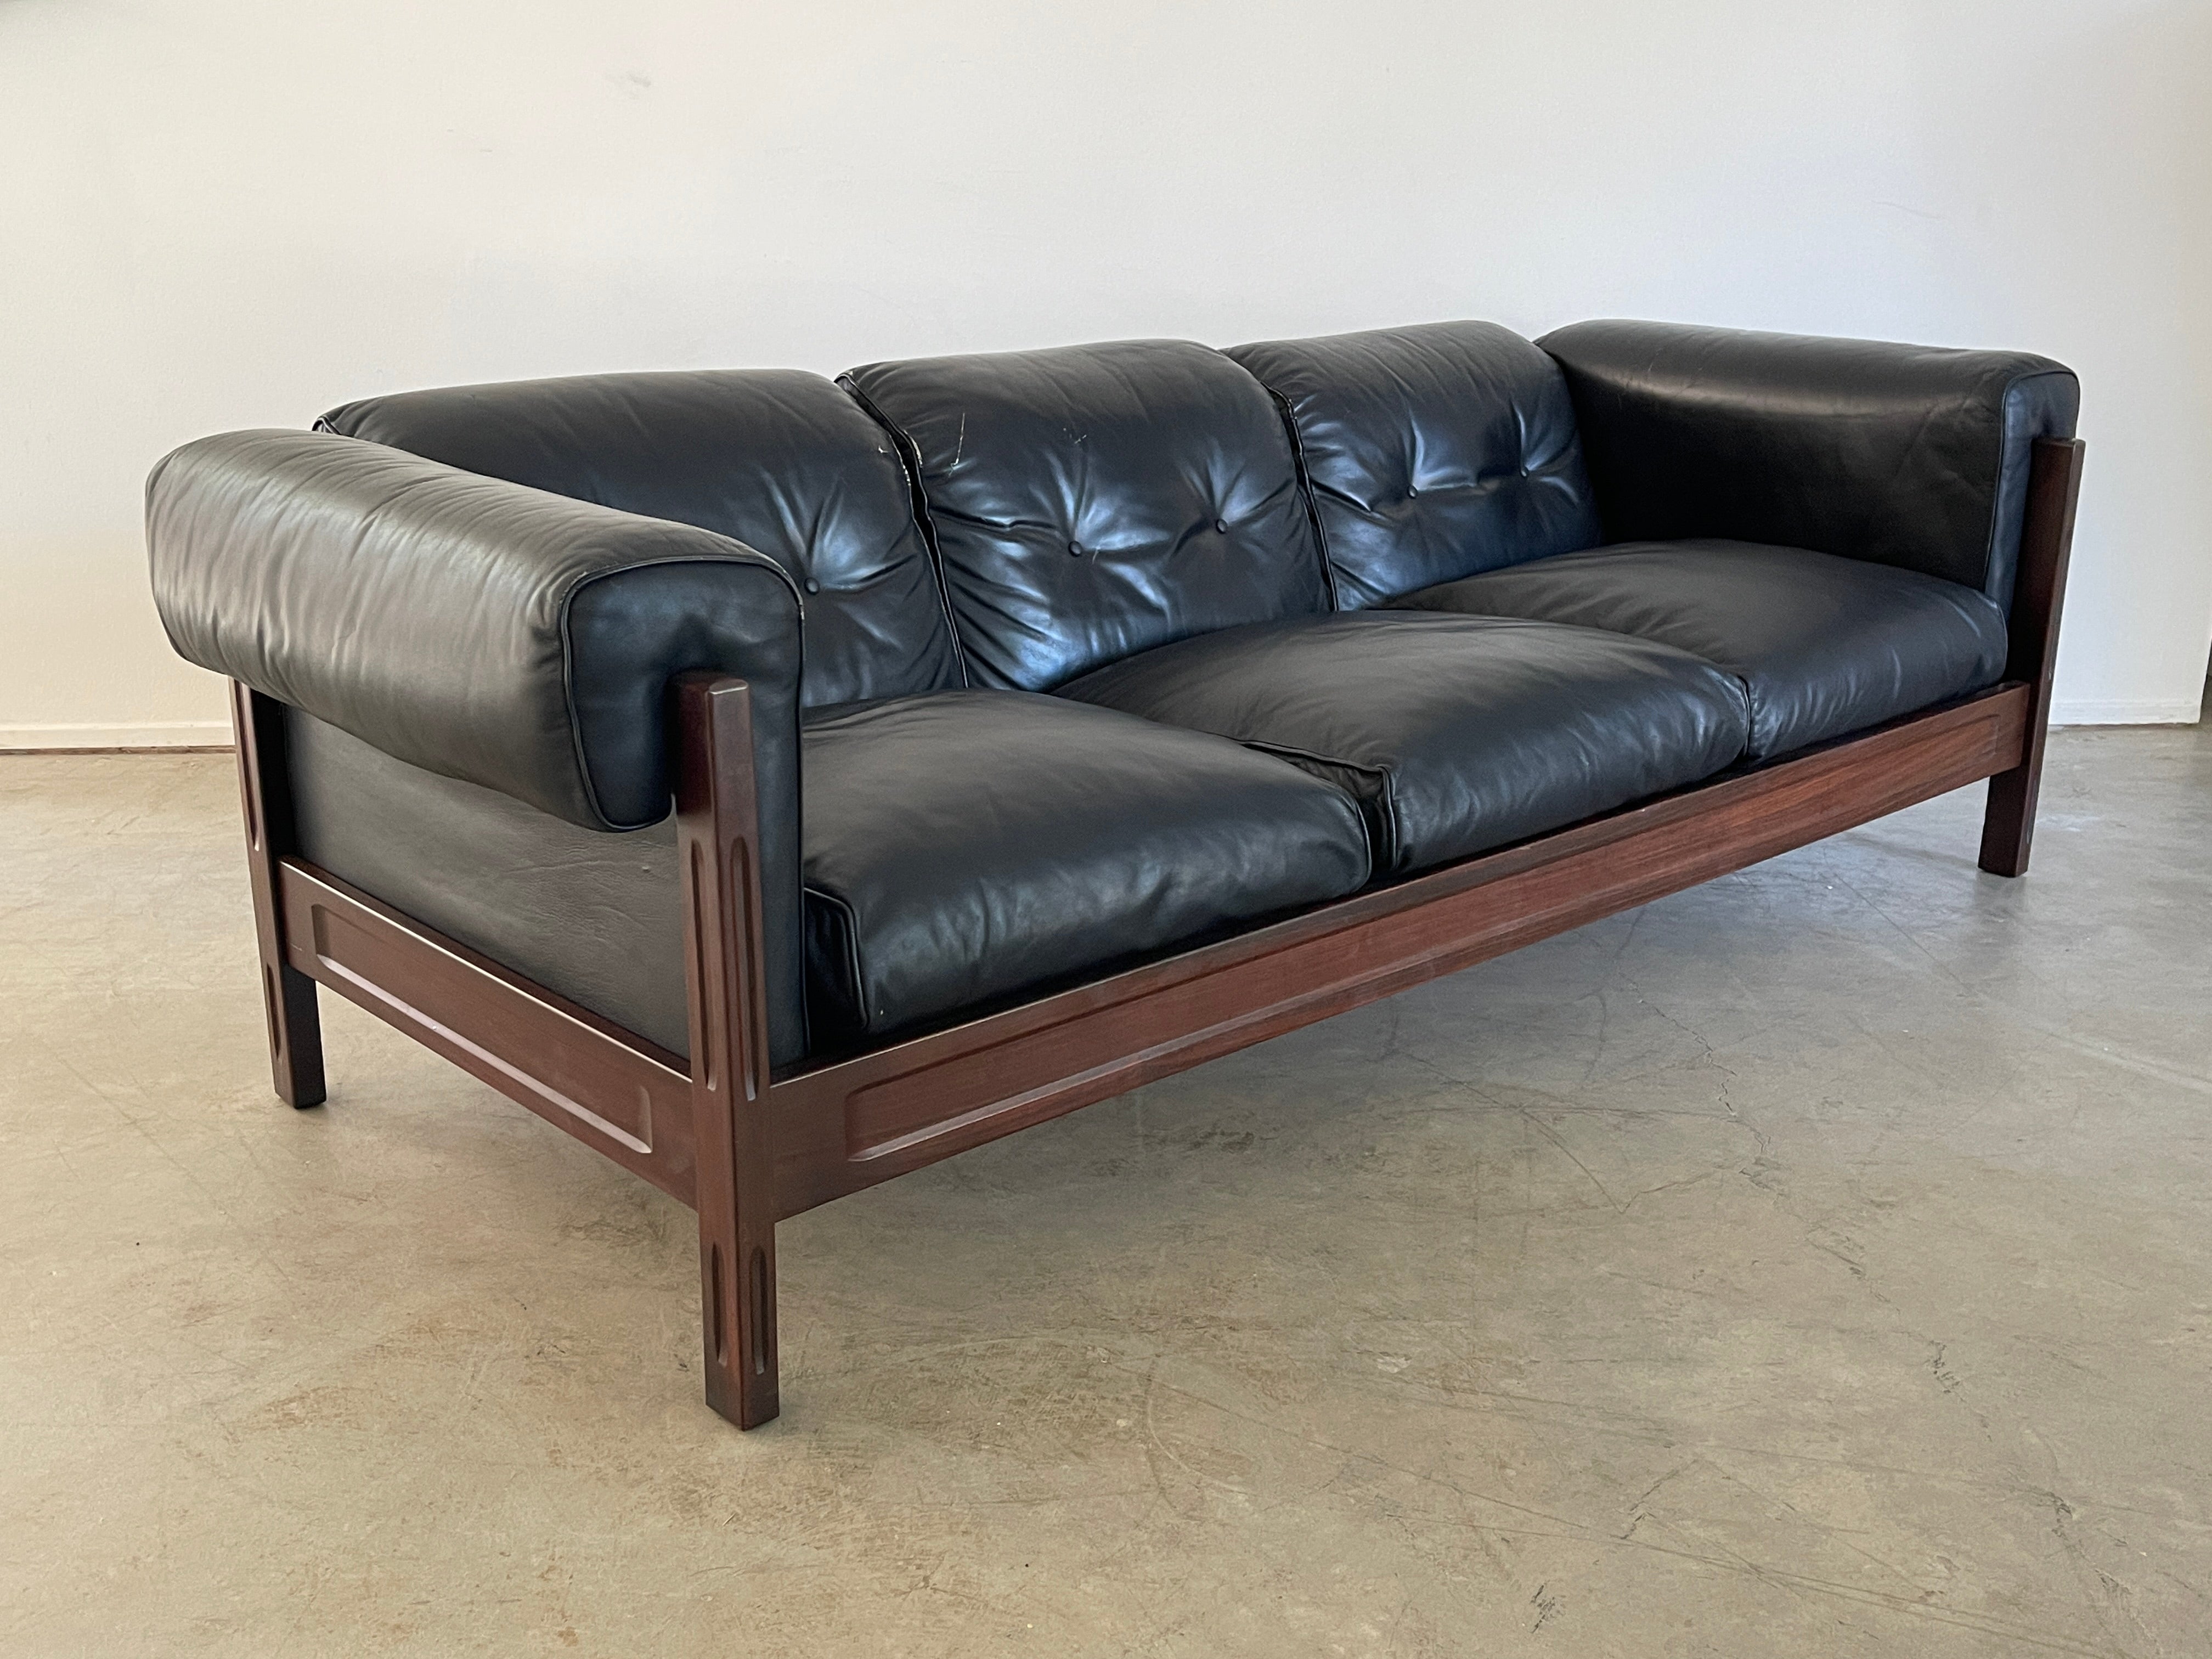 Italian Leather sofa with original black leather cushions and rosewood linear frame.
Great design.